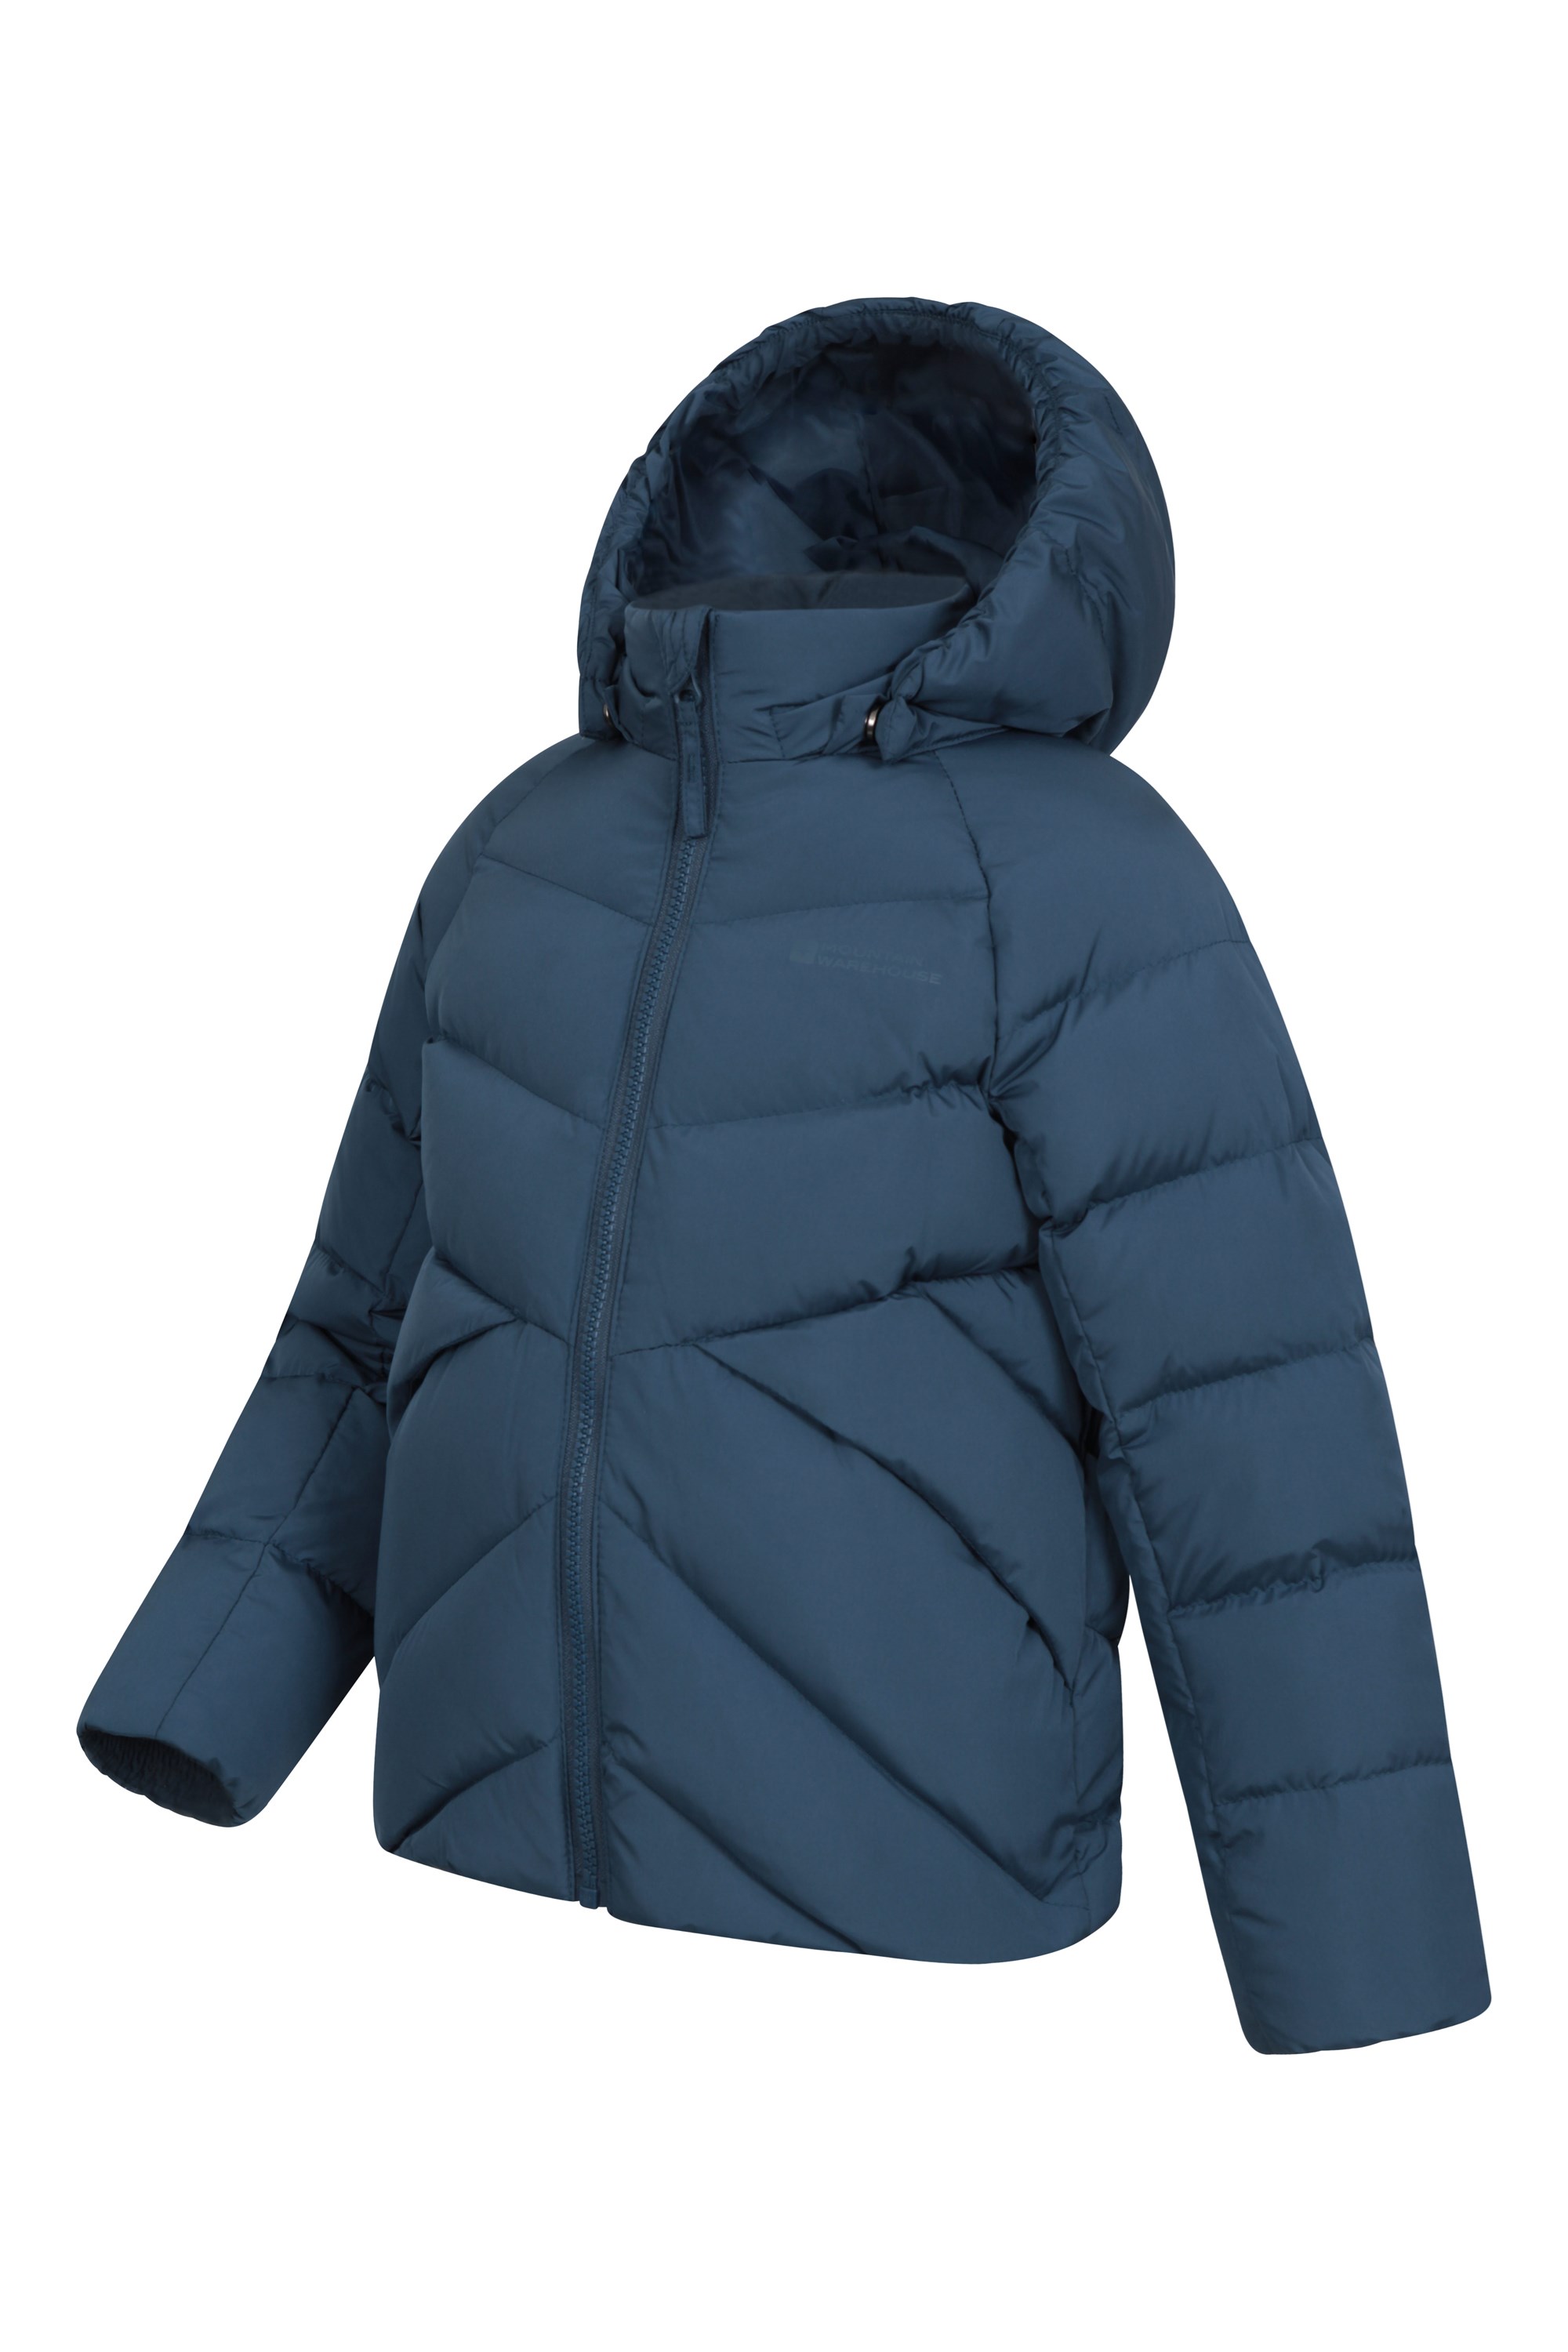 Chill Down Kids Insulated Jacket